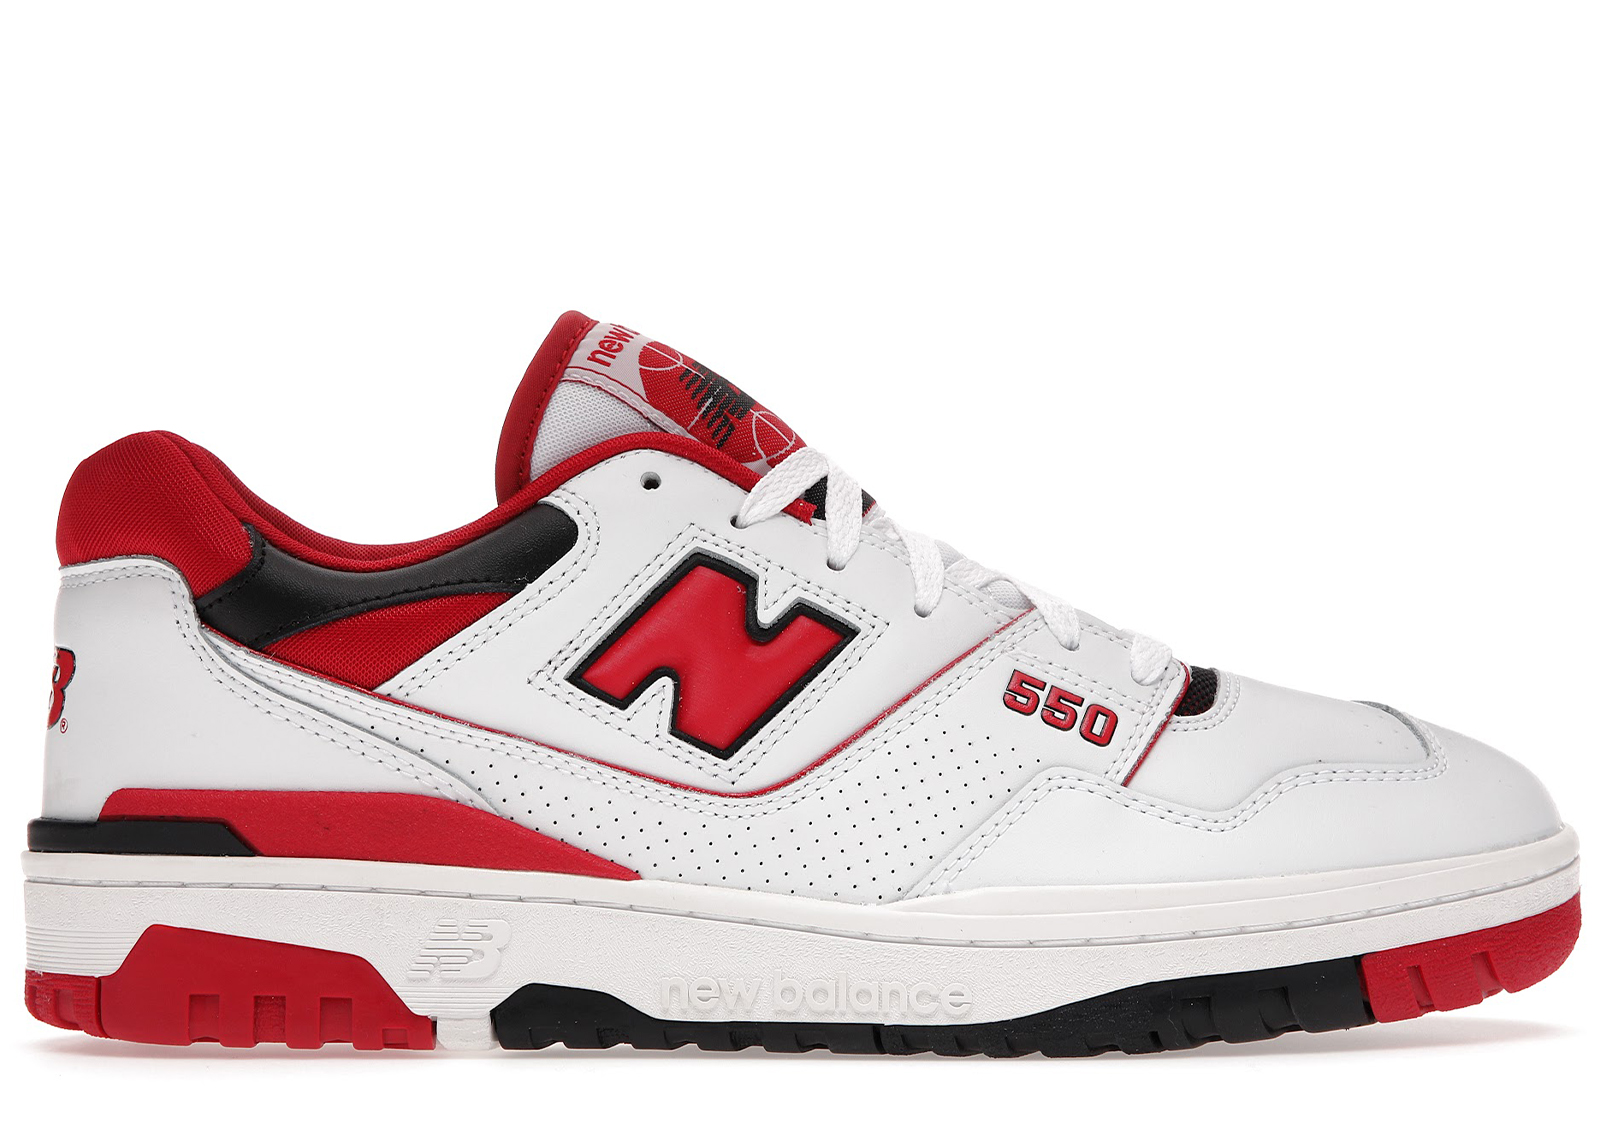 Buy New Balance Size 9 Shoes & Deadstock Sneakers